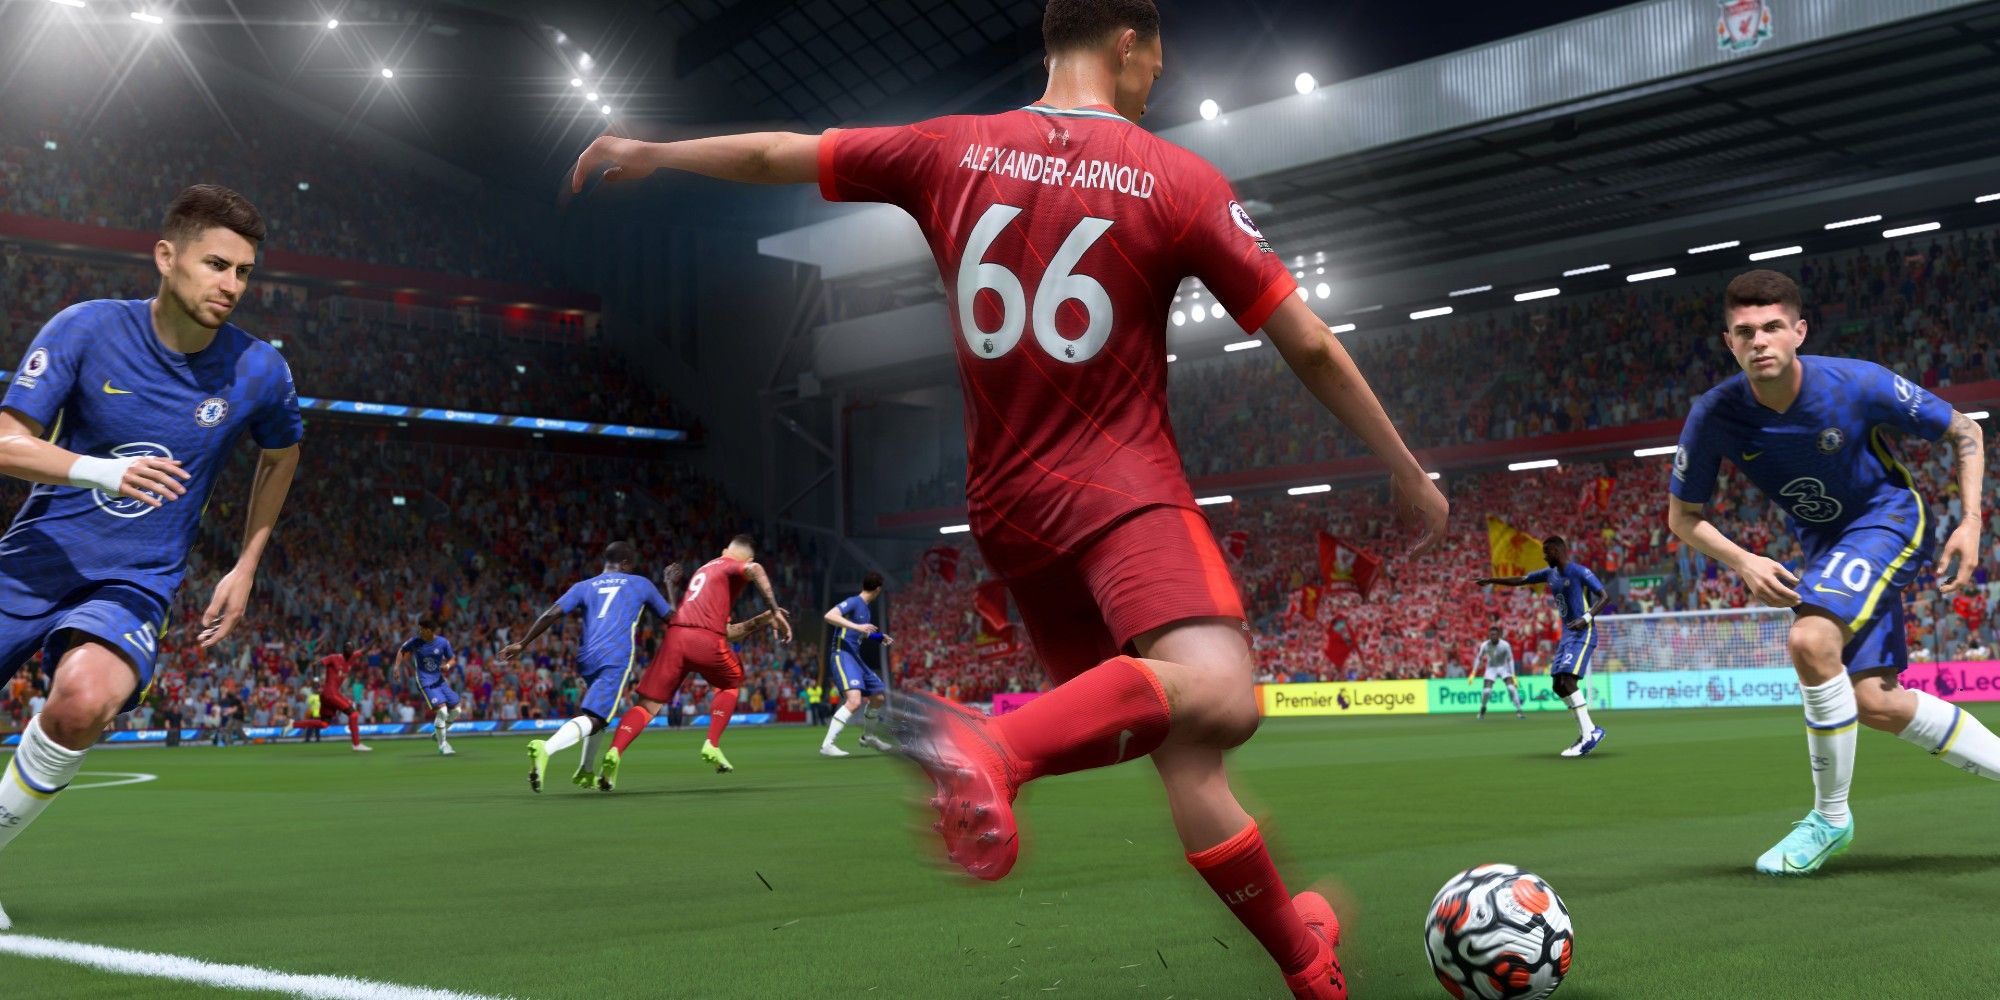 FIFA 22 - a player about to the kick the ball